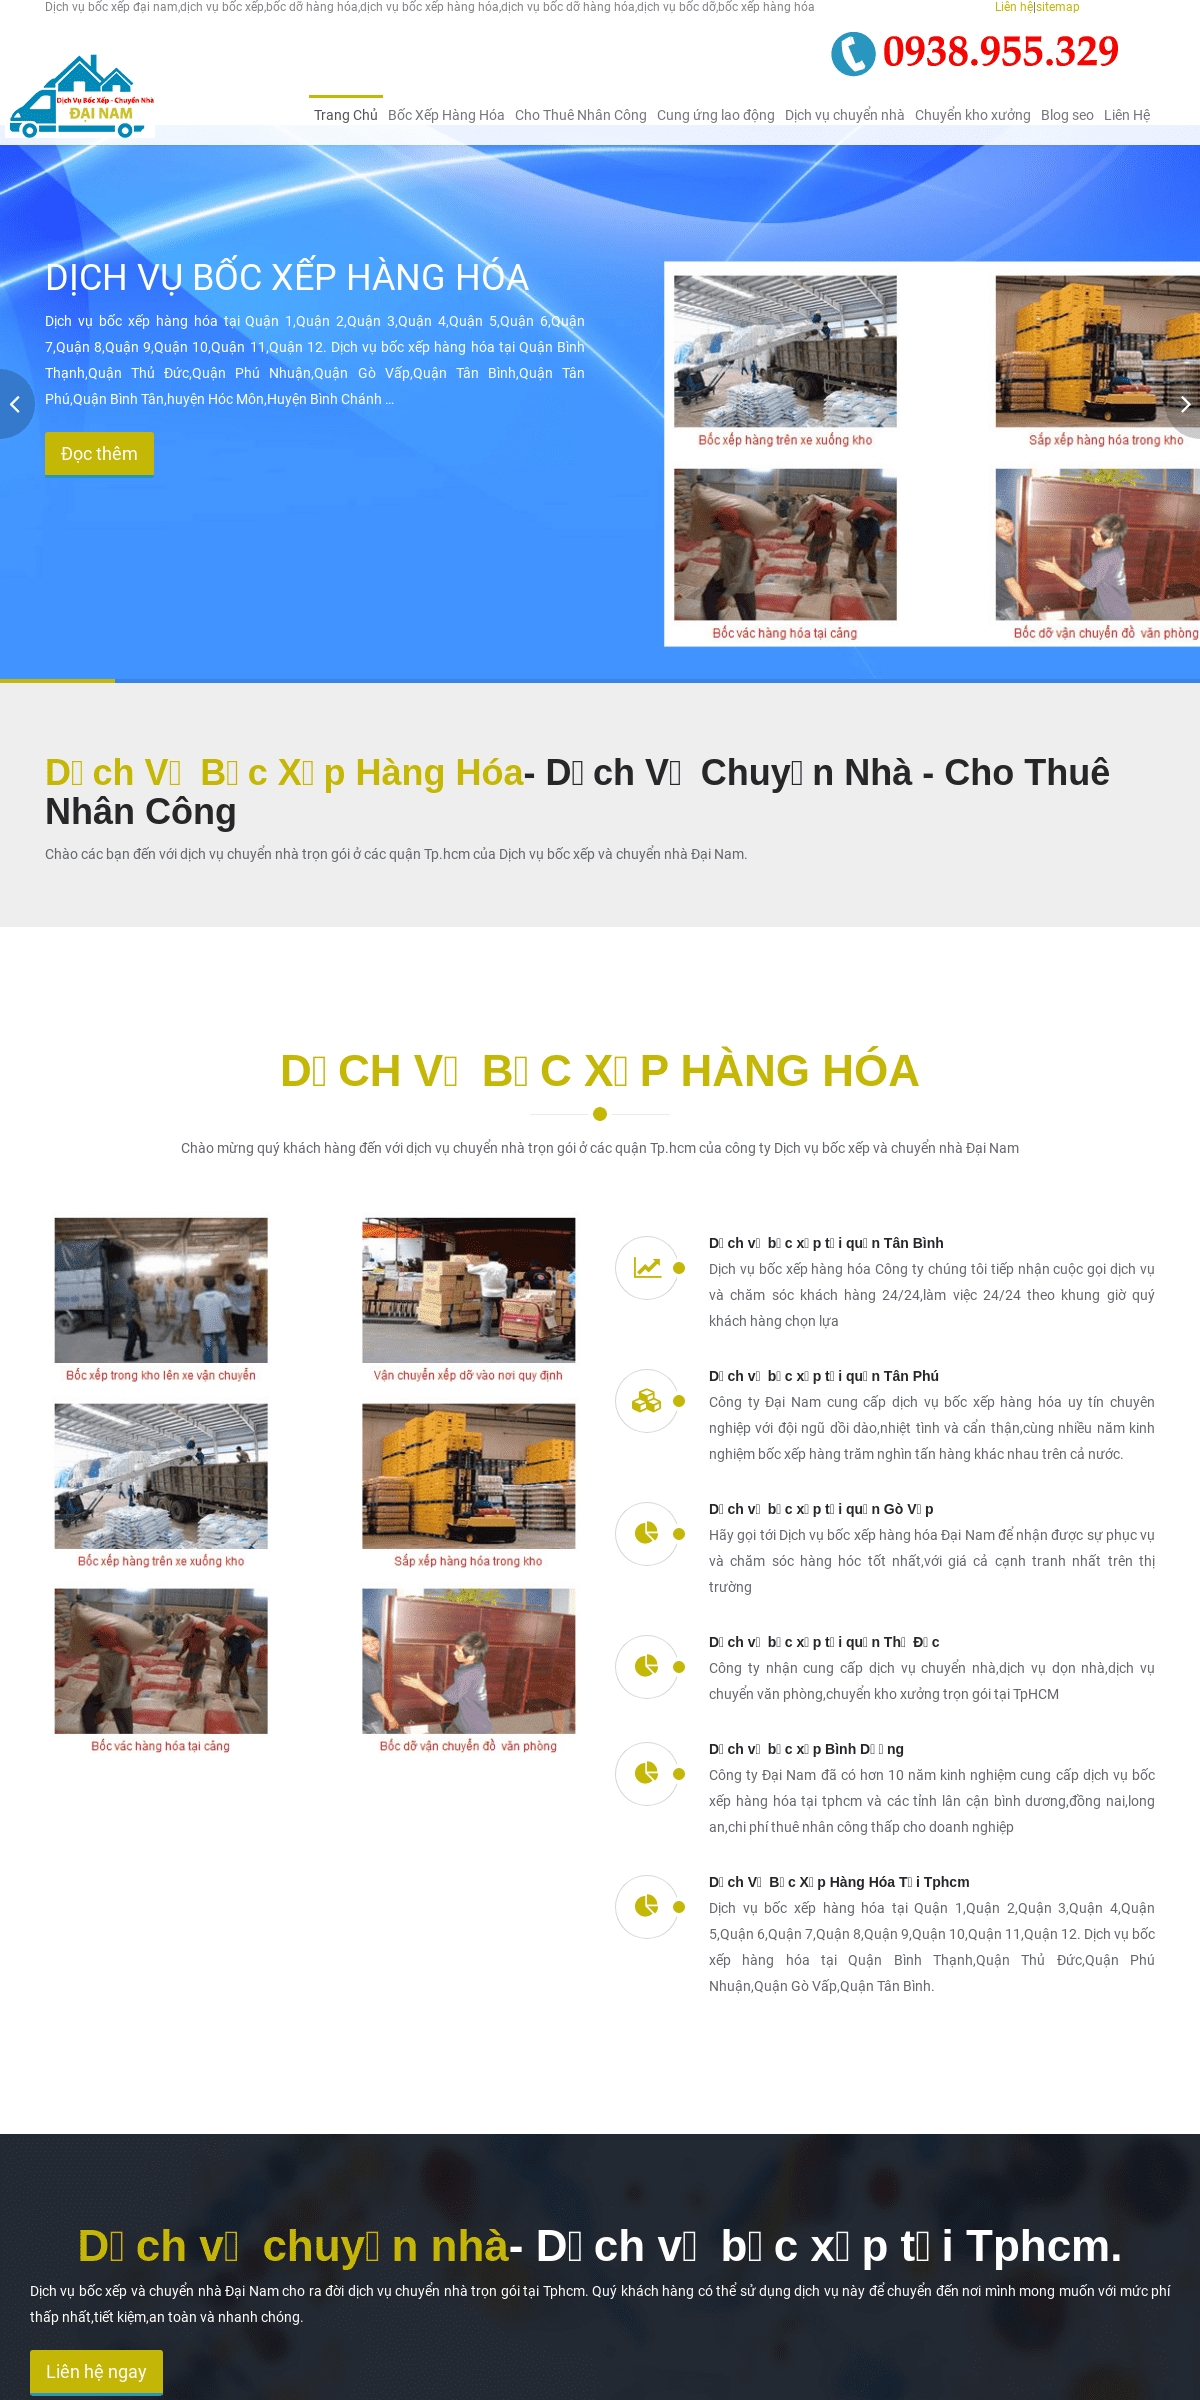 A complete backup of dichvubocxepdainam.com